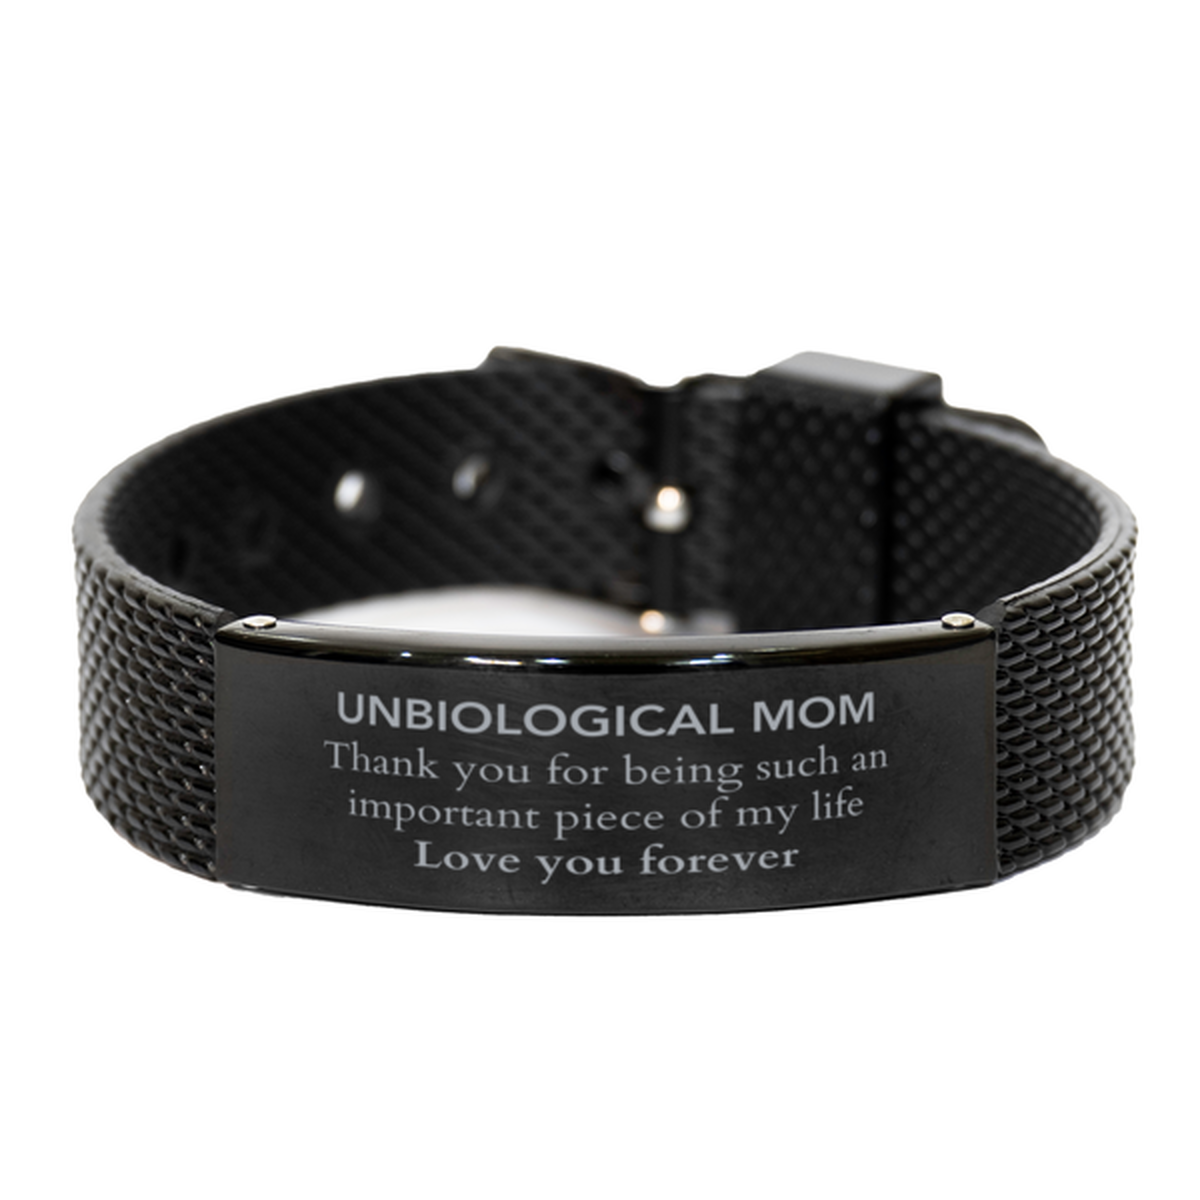 Appropriate Unbiological Mom Black Shark Mesh Bracelet Epic Birthday Gifts for Unbiological Mom Thank you for being such an important piece of my life Unbiological Mom Christmas Mothers Fathers Day